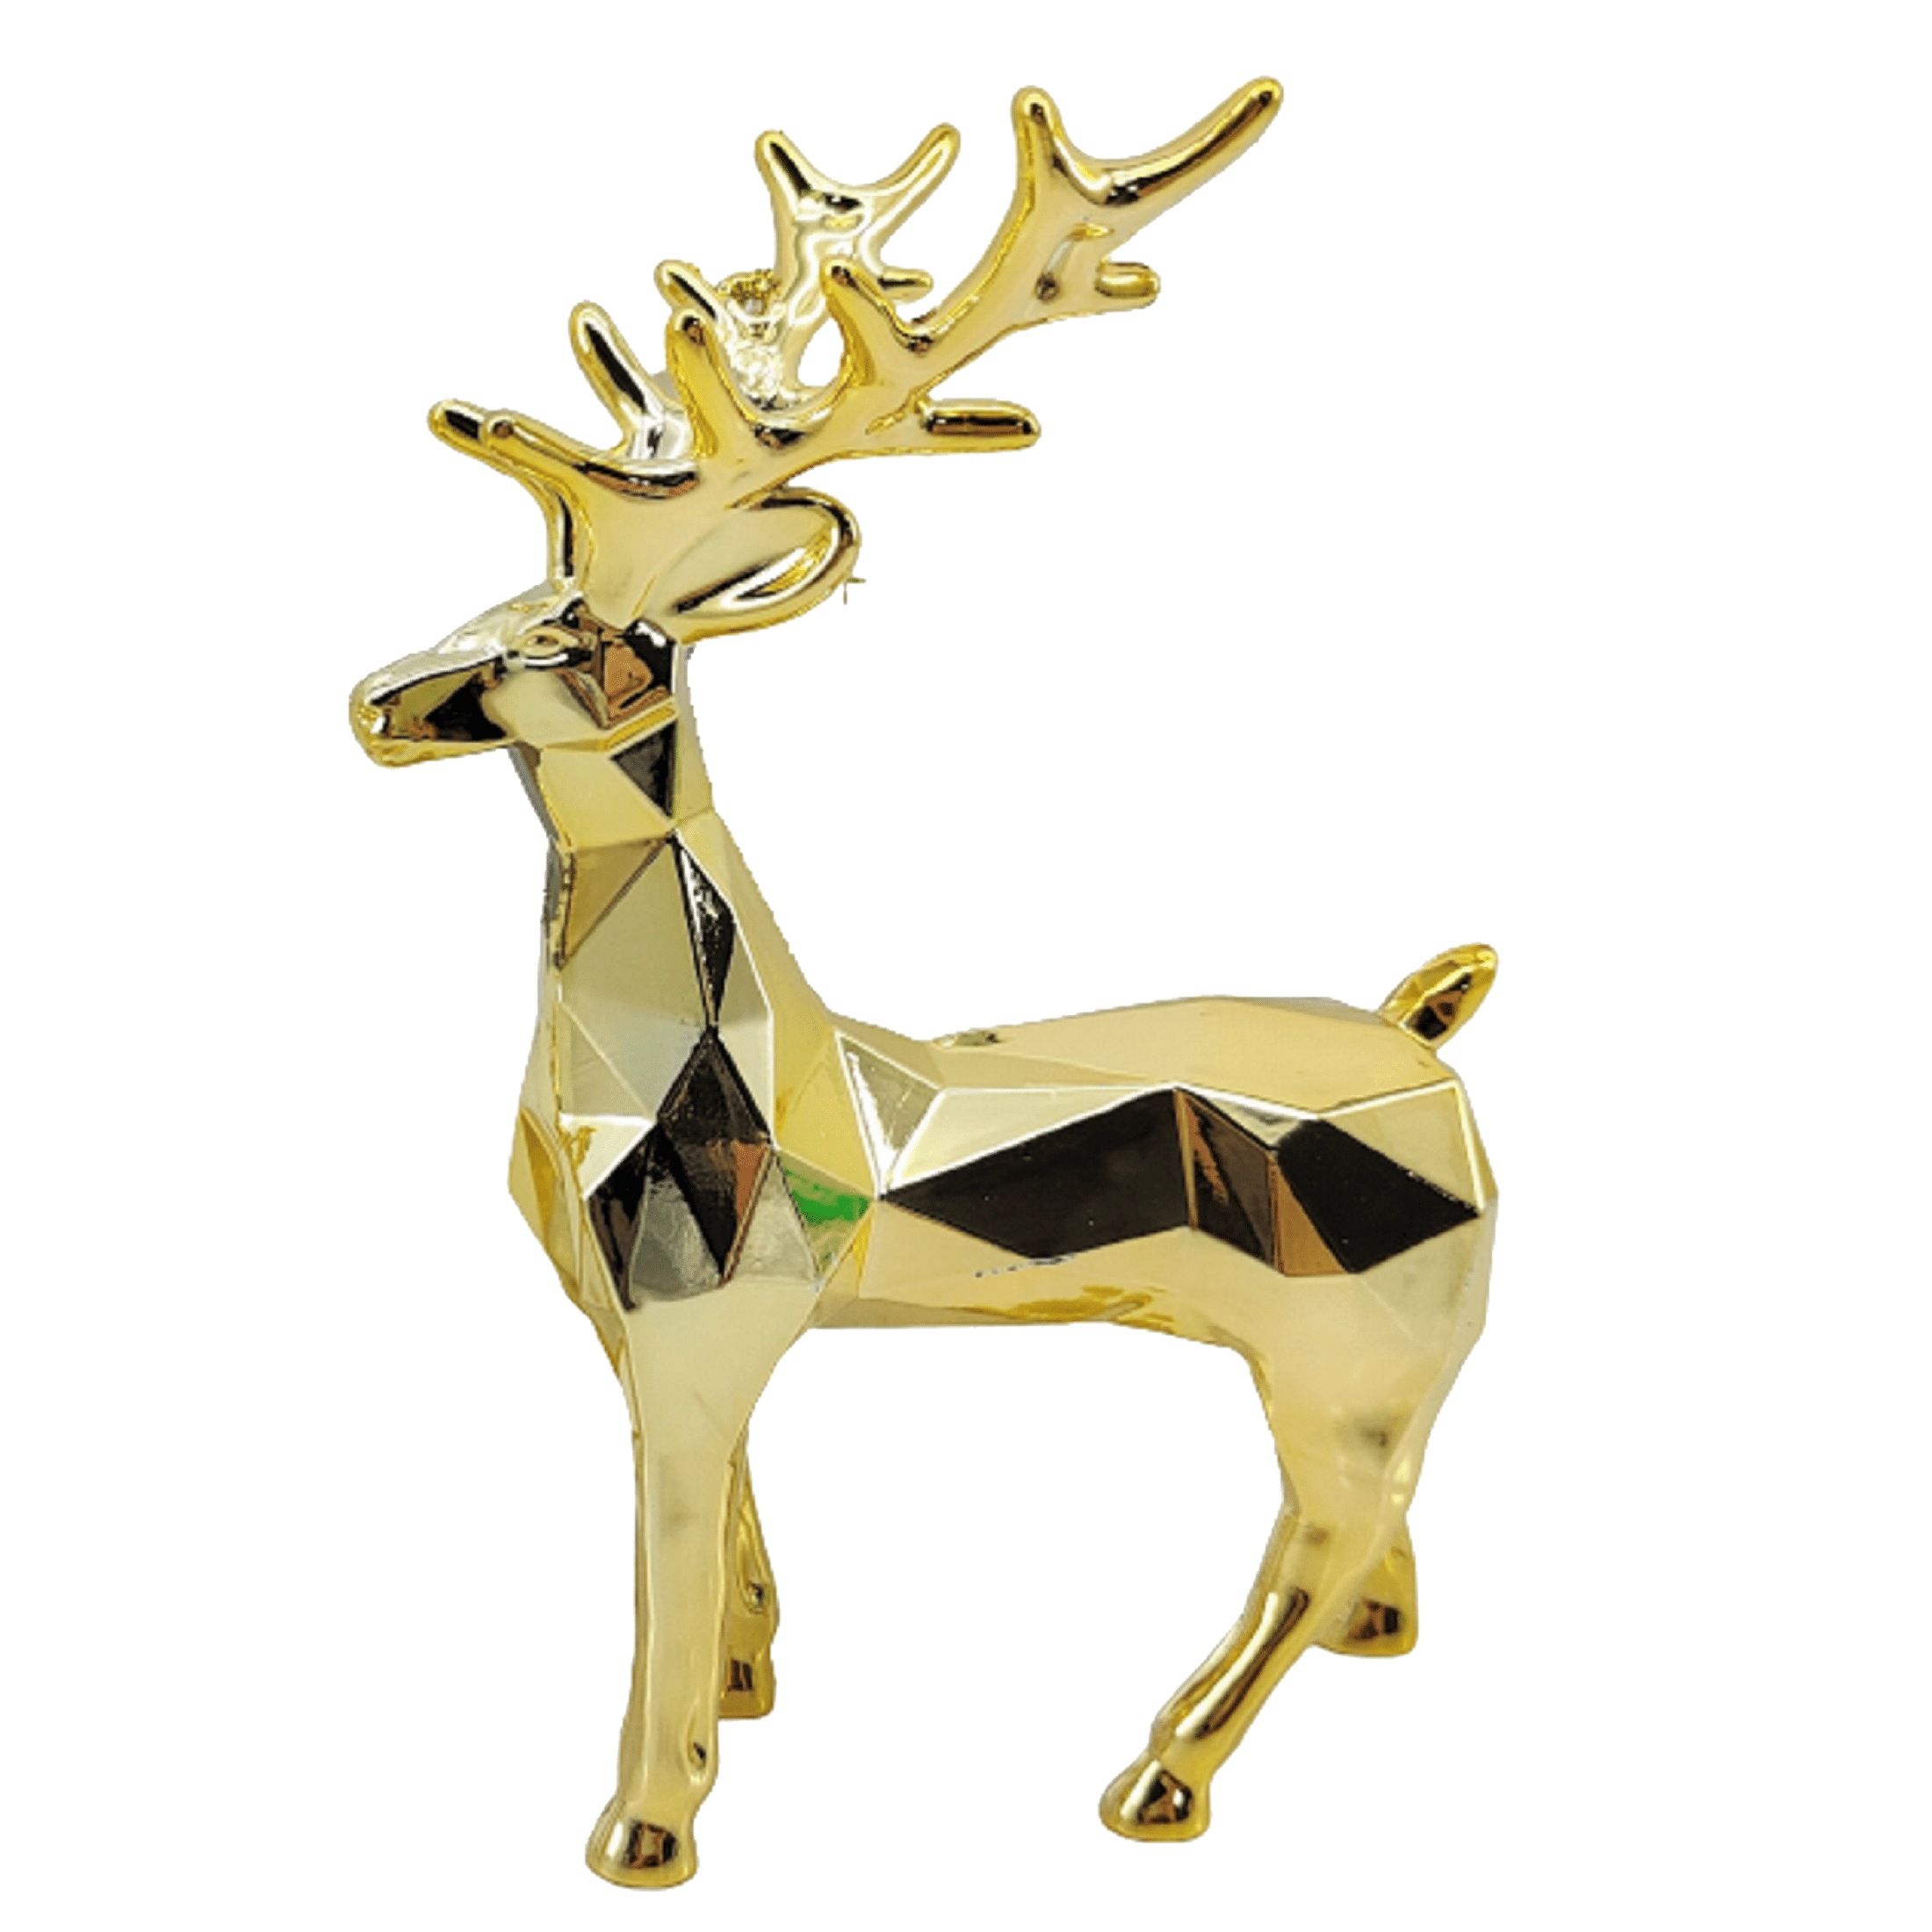 Holiday Time Gold Reindeer Ornament. Gold & Silver Theme. Gold Plated Plastic Reindeer Ornament